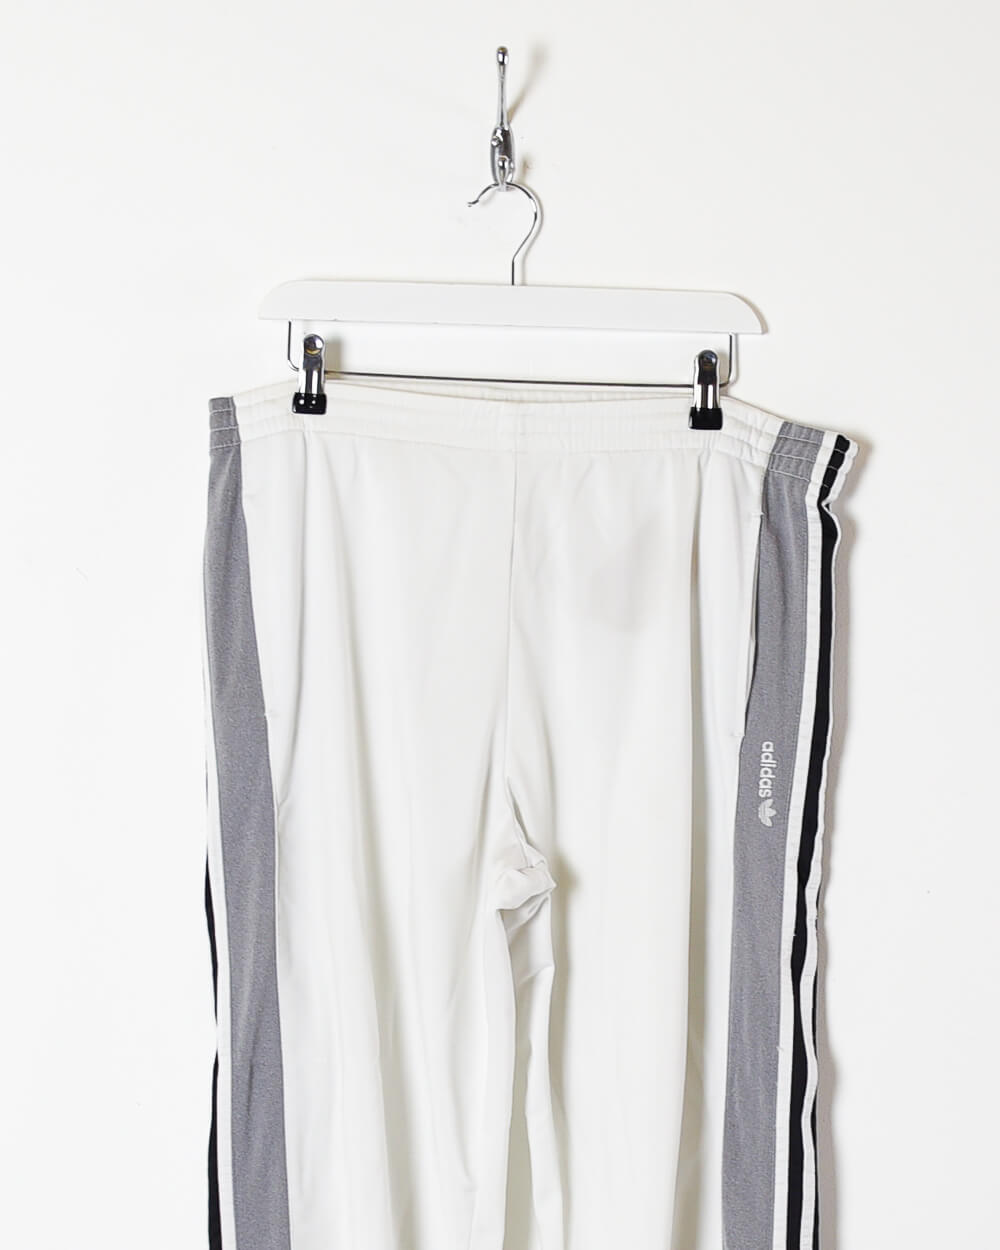 White Adidas Tracksuit Bottoms - W38 L32